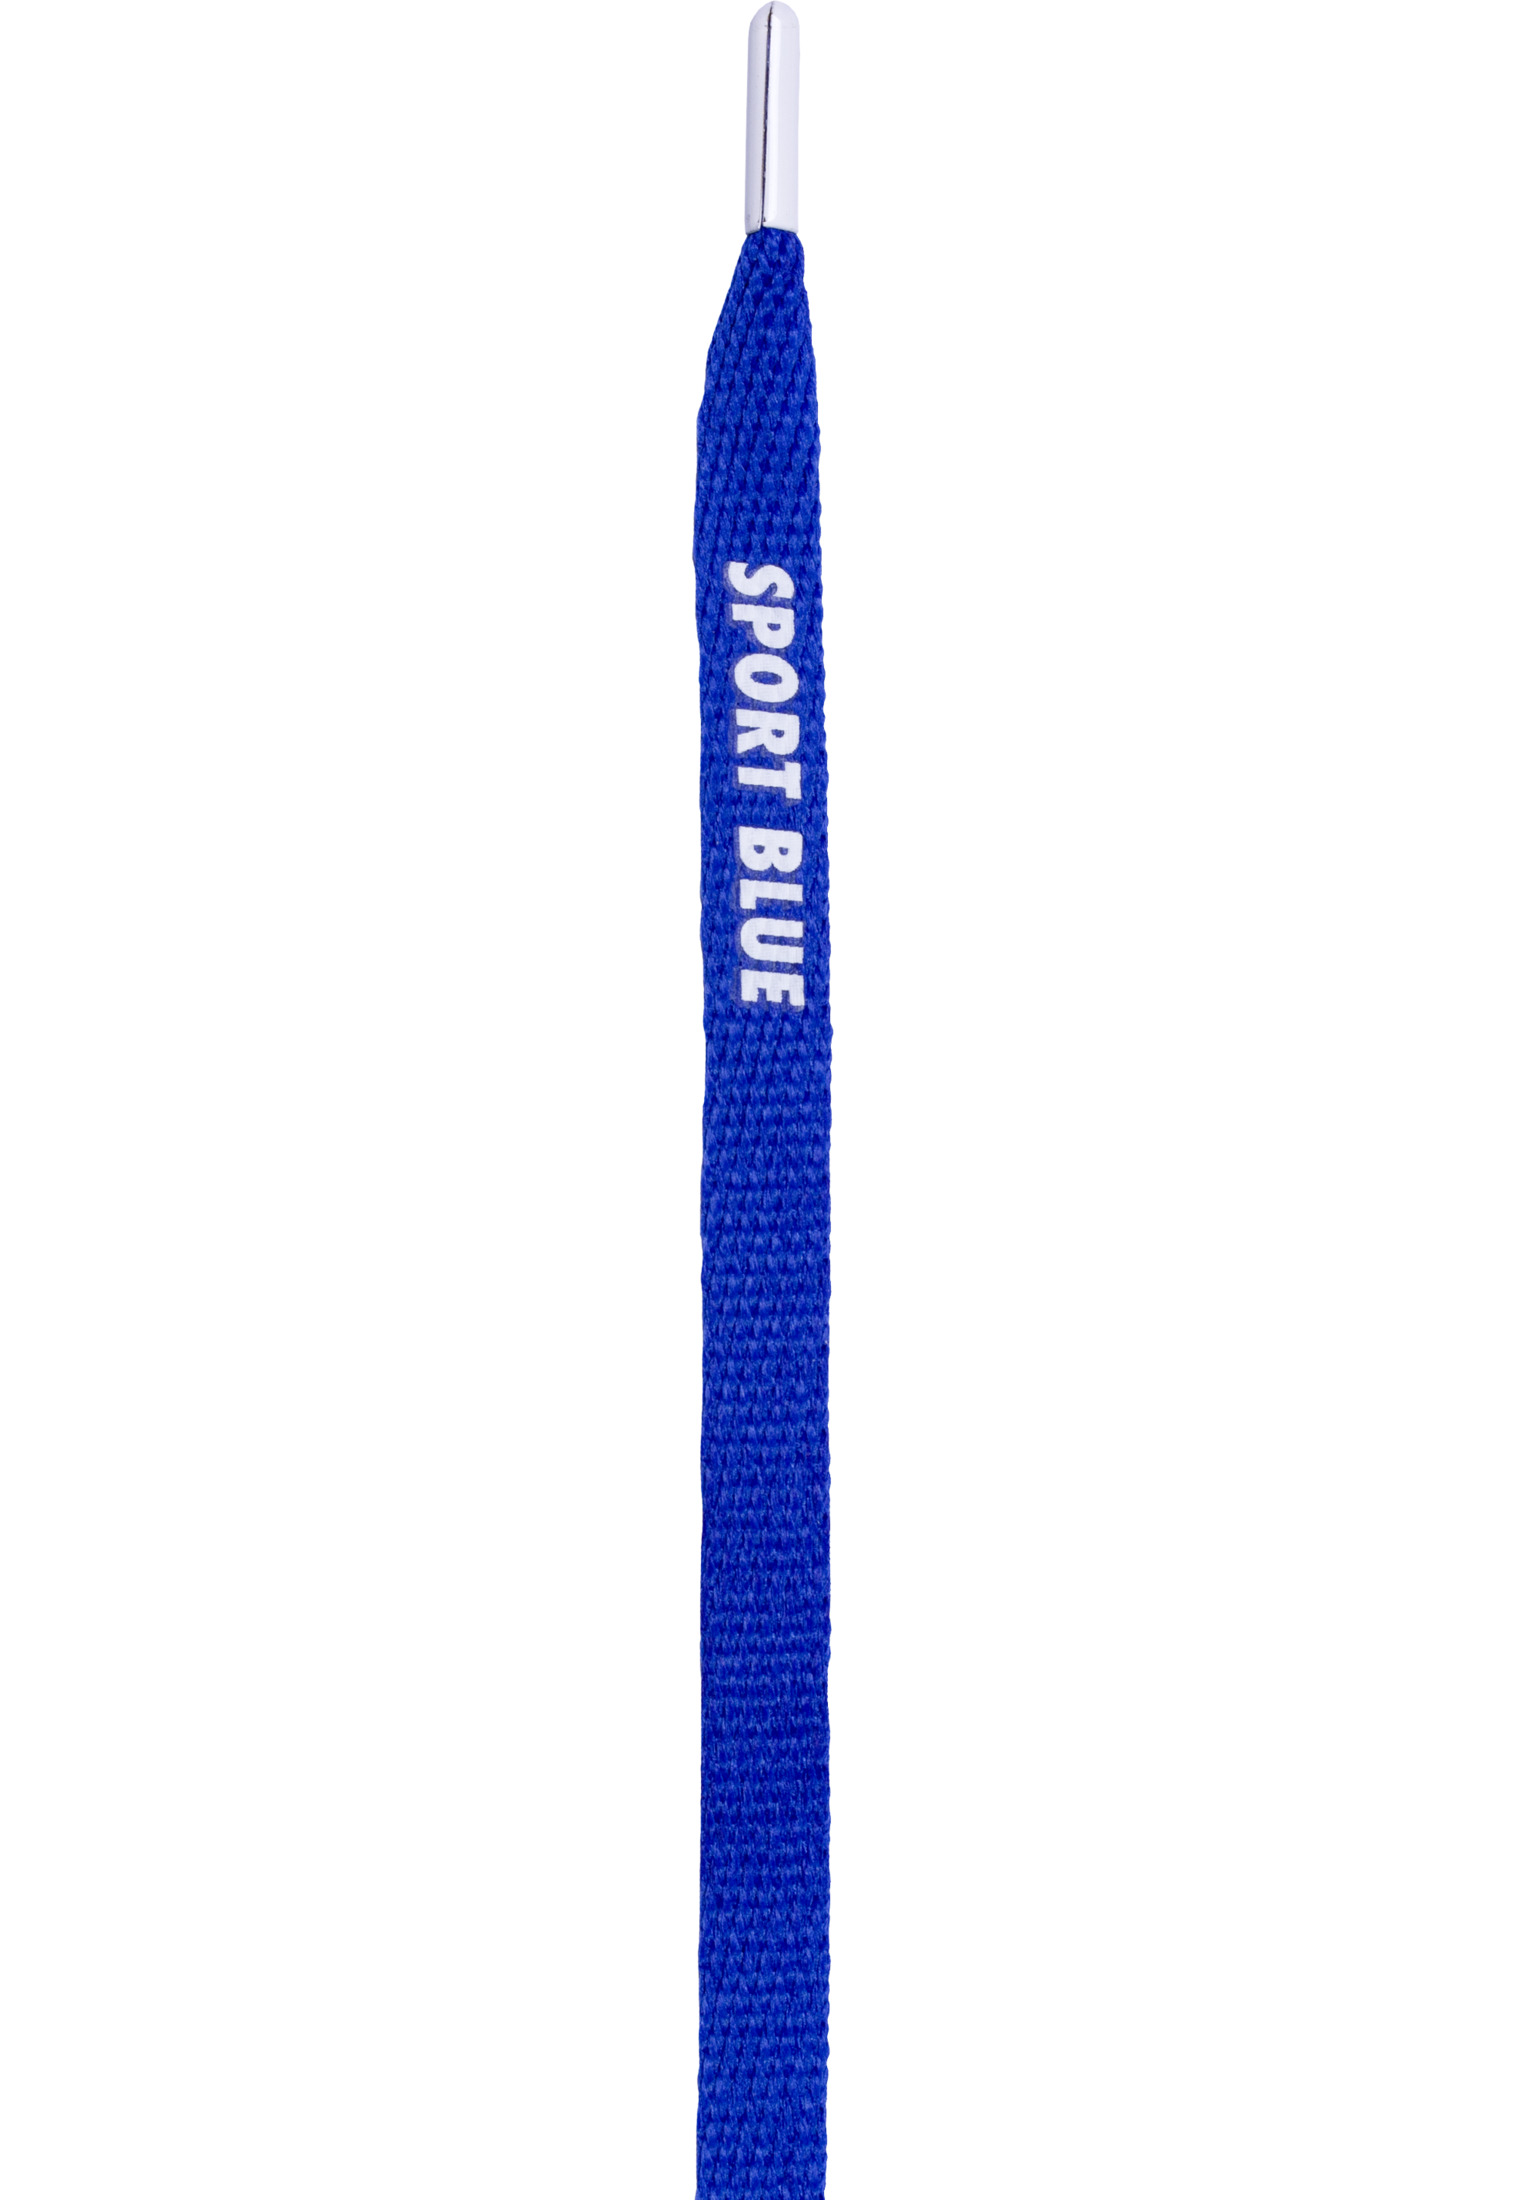 Laces Tubelaces Hook UP Pack (5er) in Farbe sport blue